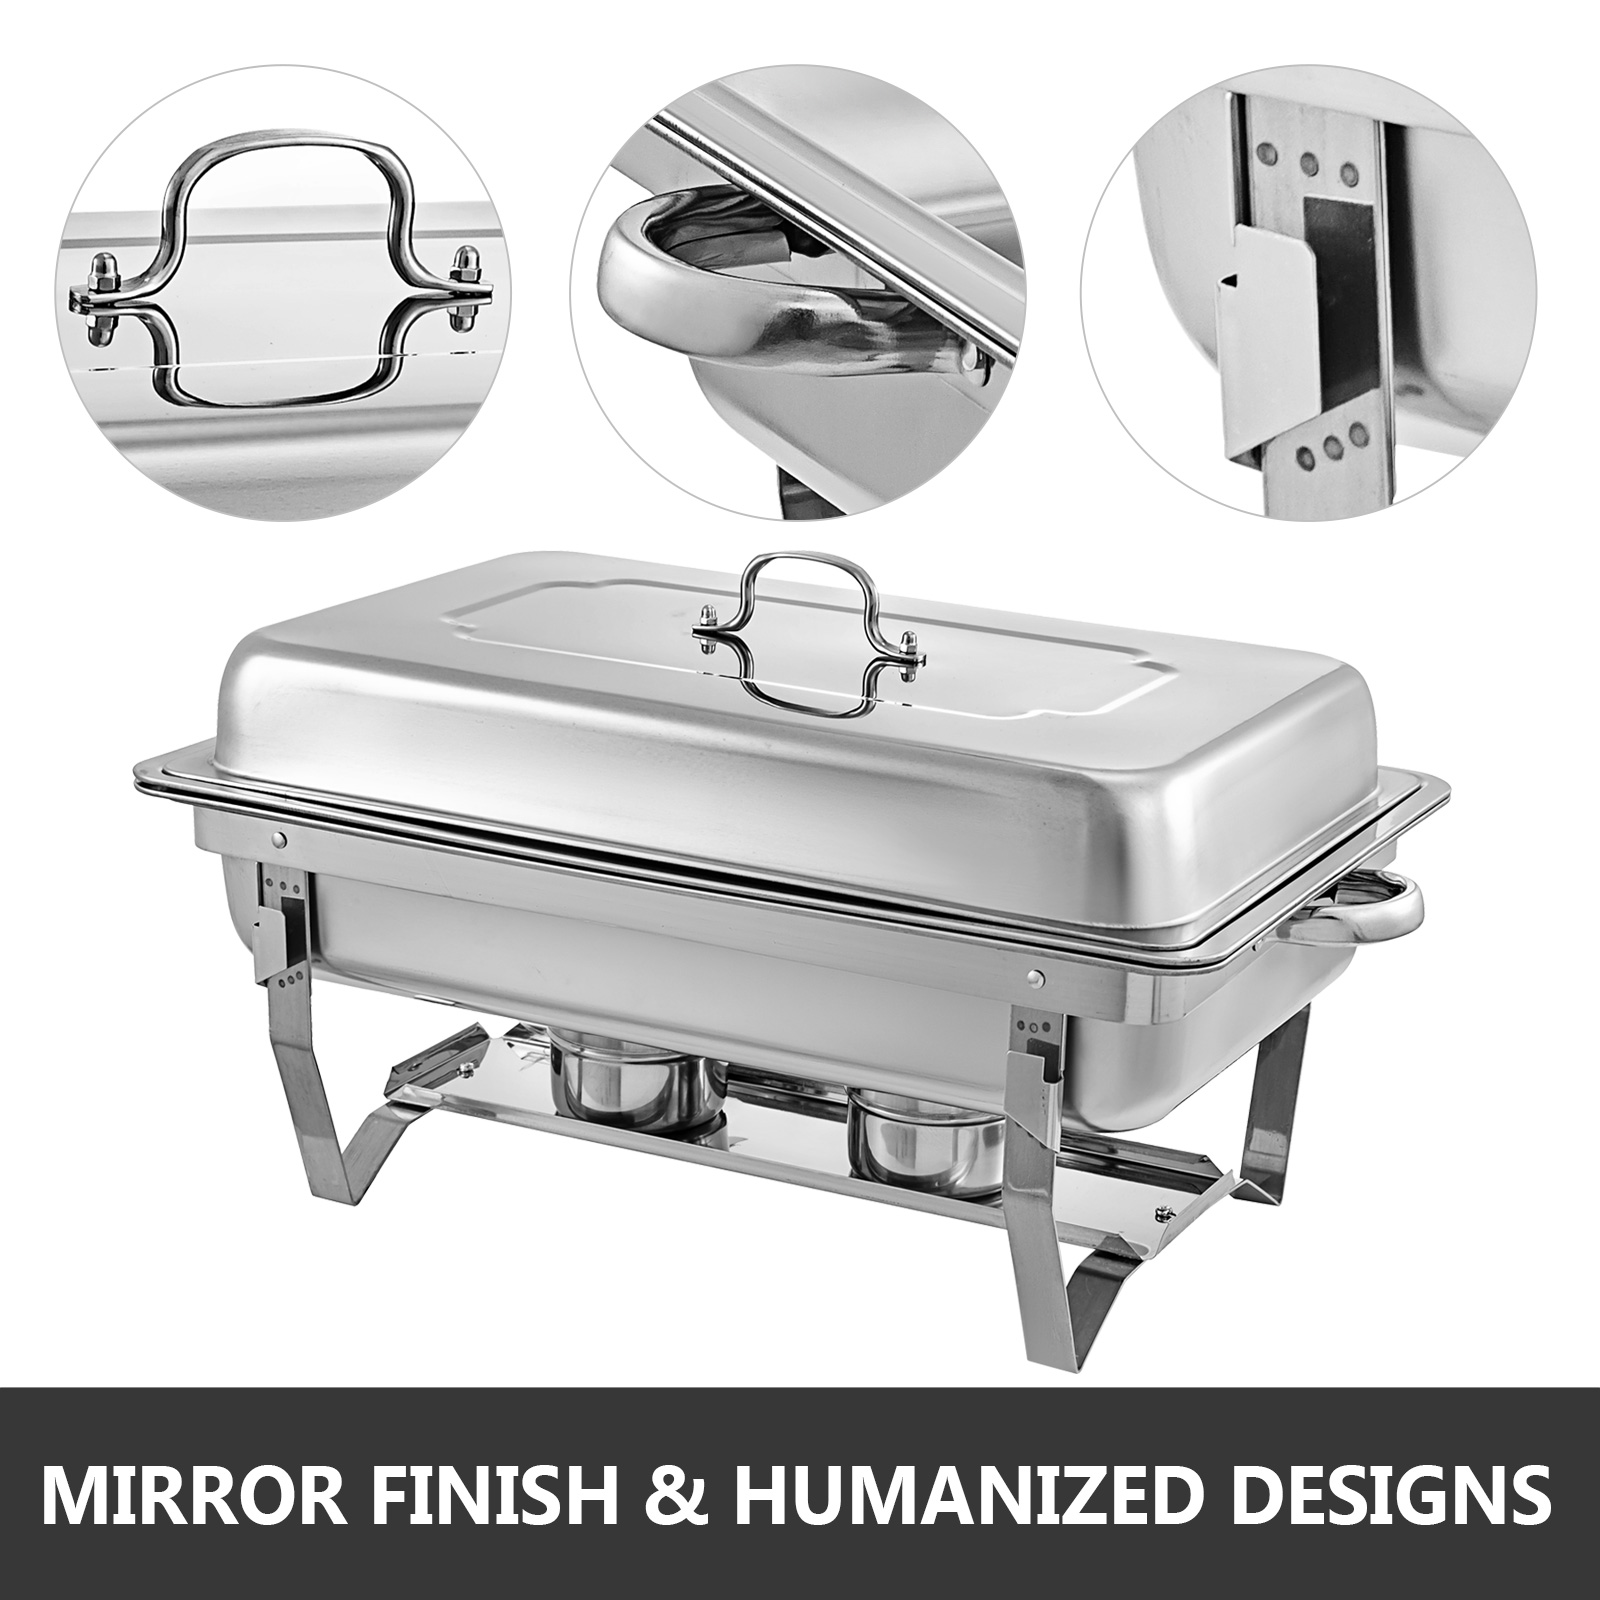 6 PACK CATERING CHAFER CHAFING DISH SETS 8 QT FULL SIZE BUFFET STAINLESS STEEL 